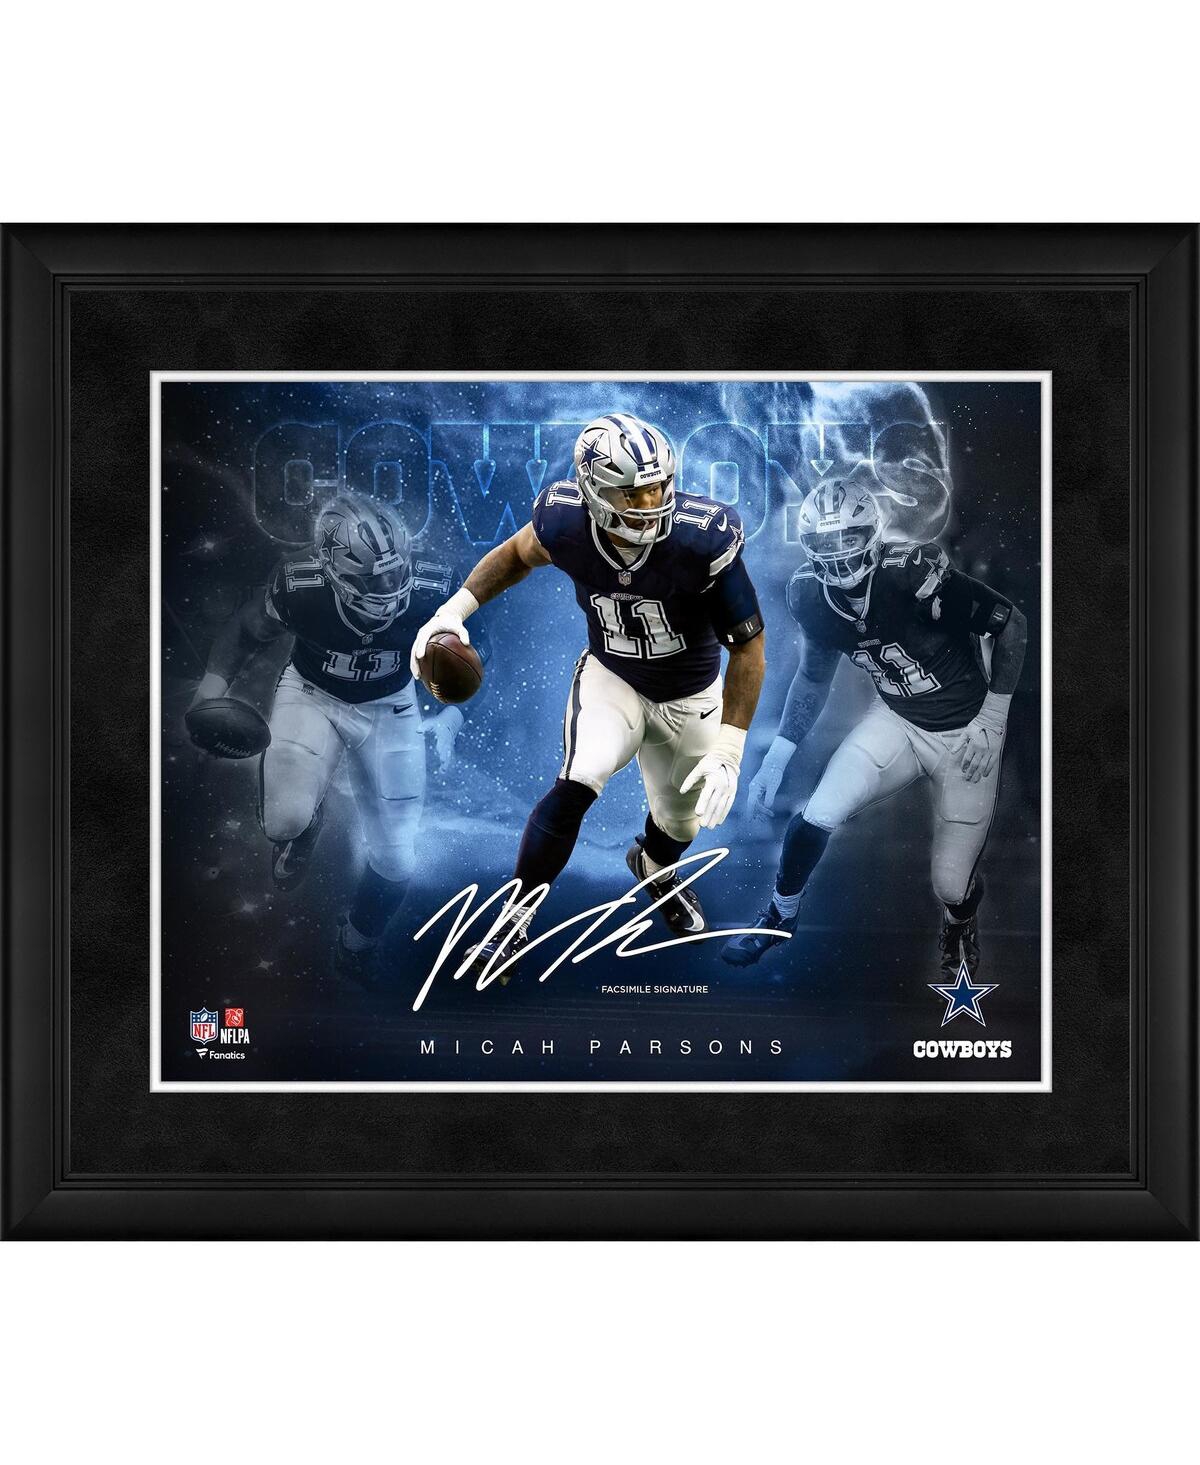 Fanatics Authentic Micah Parsons Dallas Cowboys Facsimile Signature Framed 16" X 20" Stars Of The Game Collage In Black